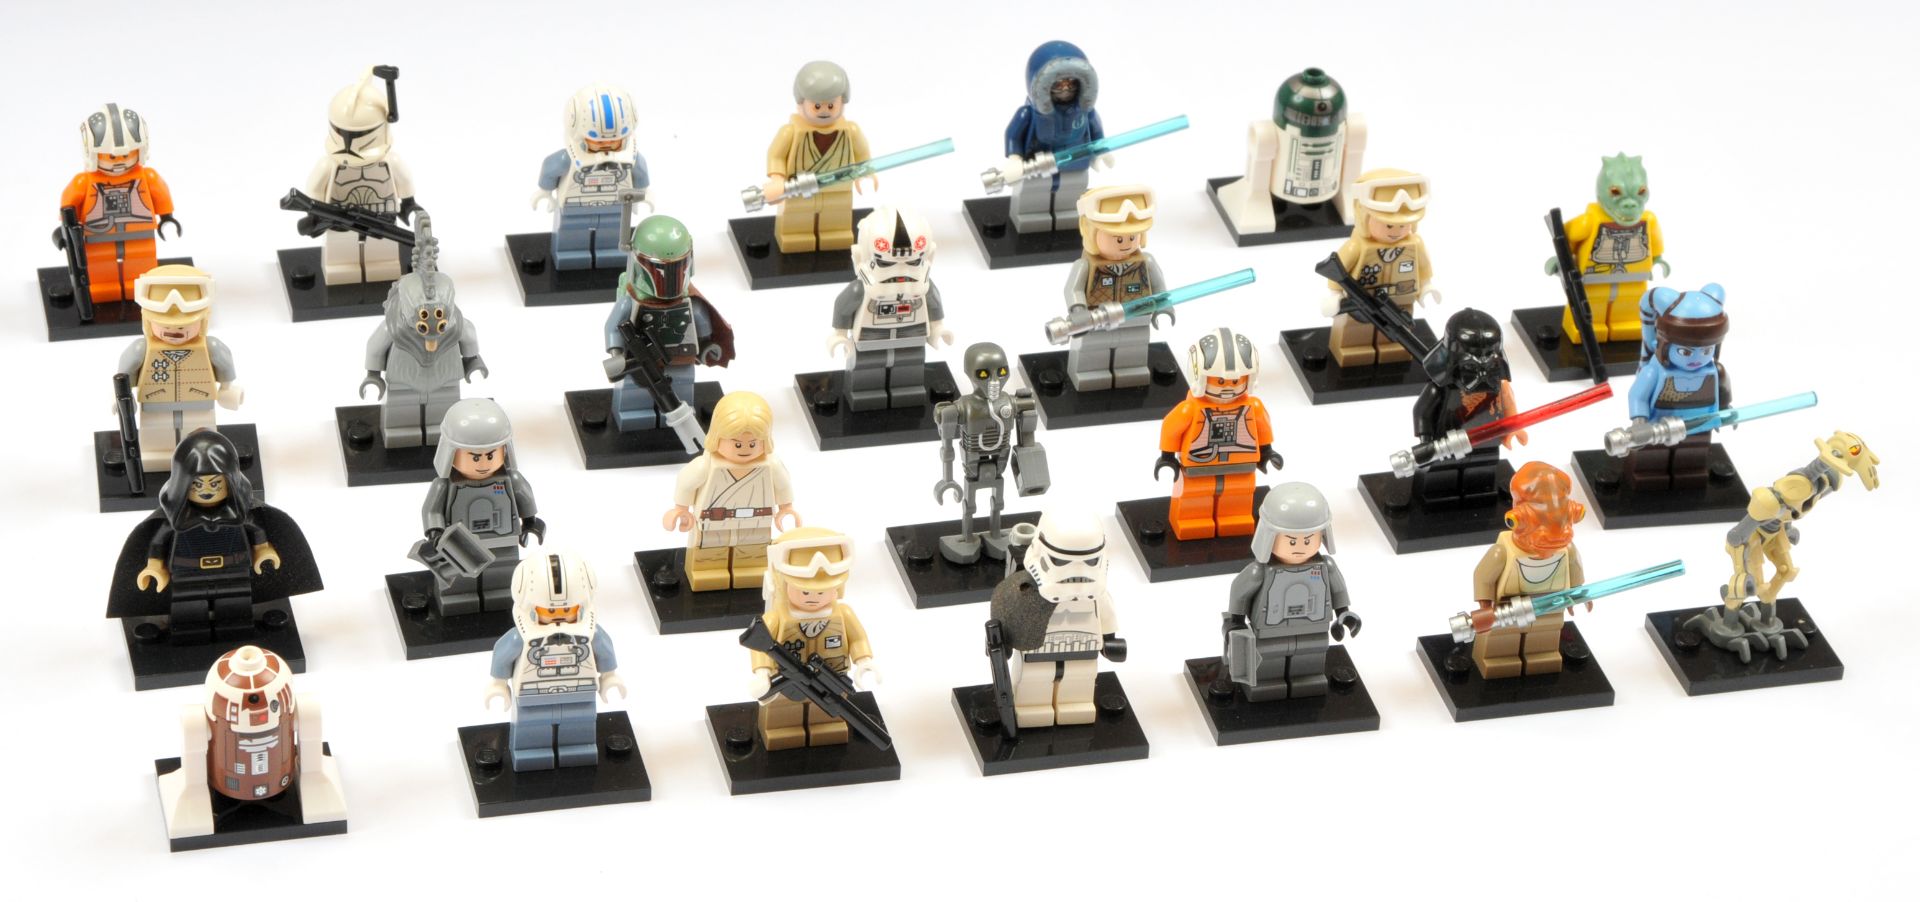 Lego Star Wars Minifigures 2010 Issues including Aayla Secura, Astromech Droids, Bossk, plus othe...